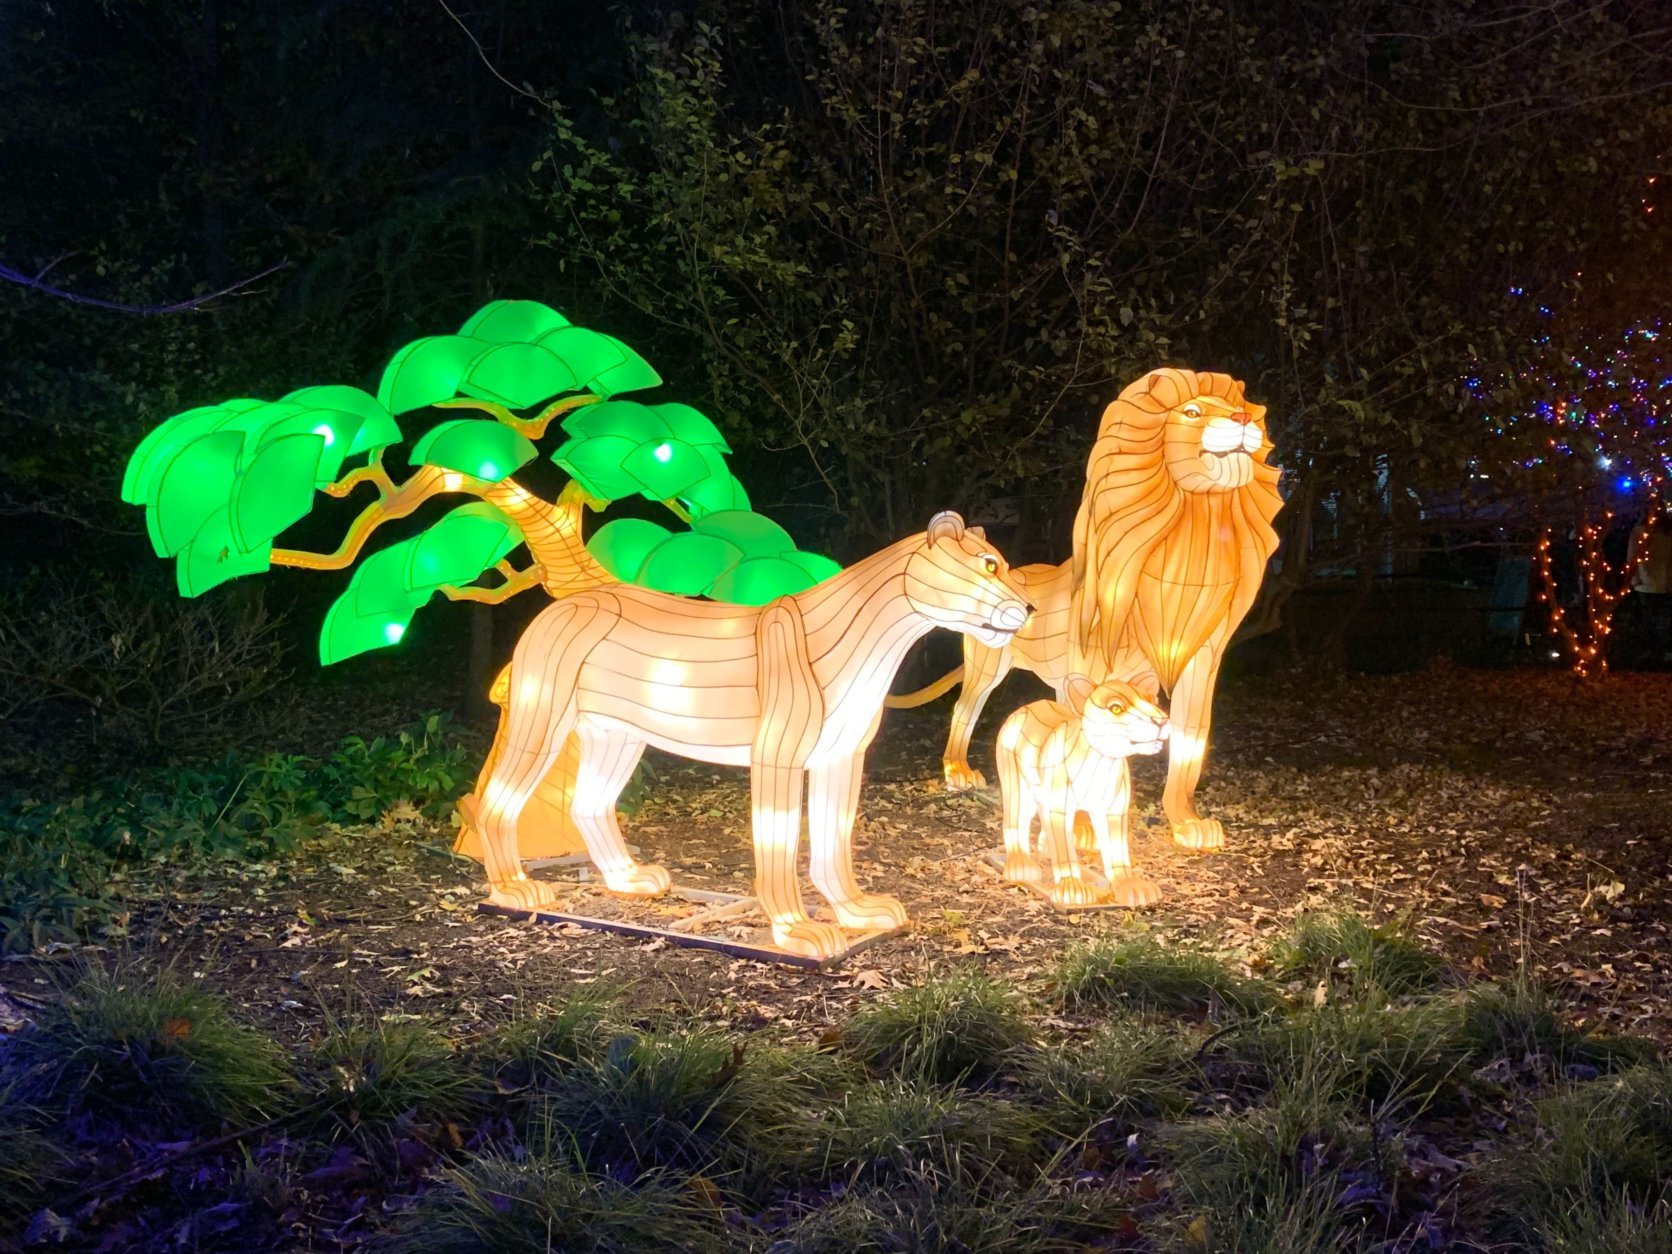 <h2>ZooLights return</h2>
<p><a href="https://wtop.com/gallery/dc/zoolights-returns-at-the-national-zoo/" target="_blank" rel="noopener">ZooLights</a> returns to the National Zoo until Jan. 1. The annual tradition is free and features performances, treats and plenty of LED lights.</p>
